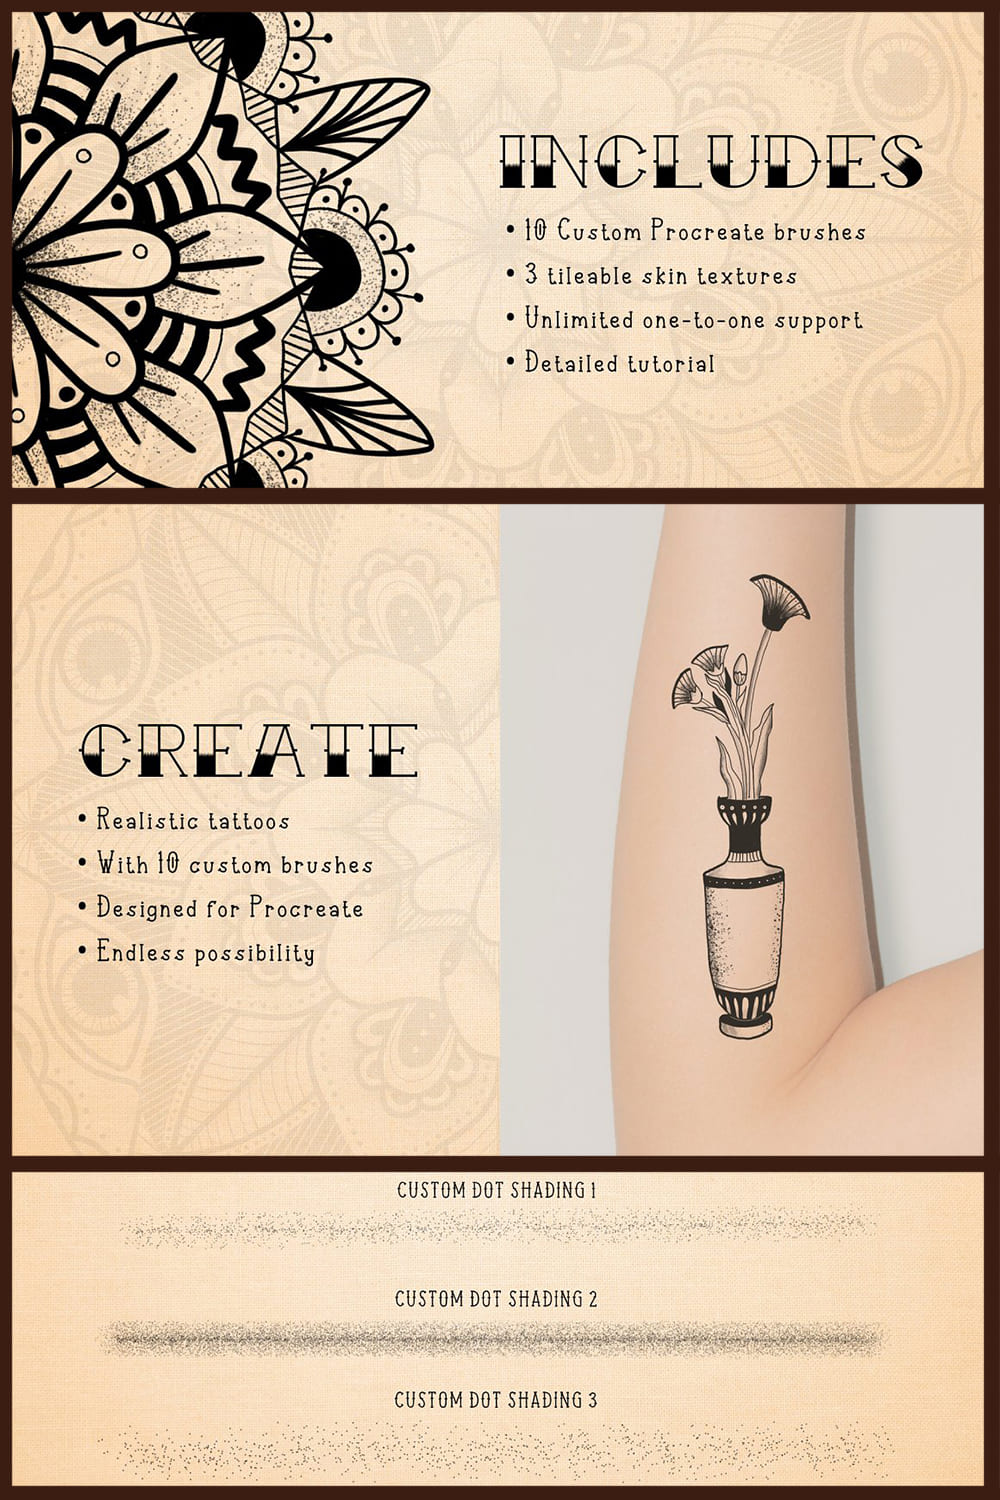 Creative illustrations that are great for a tattoo.